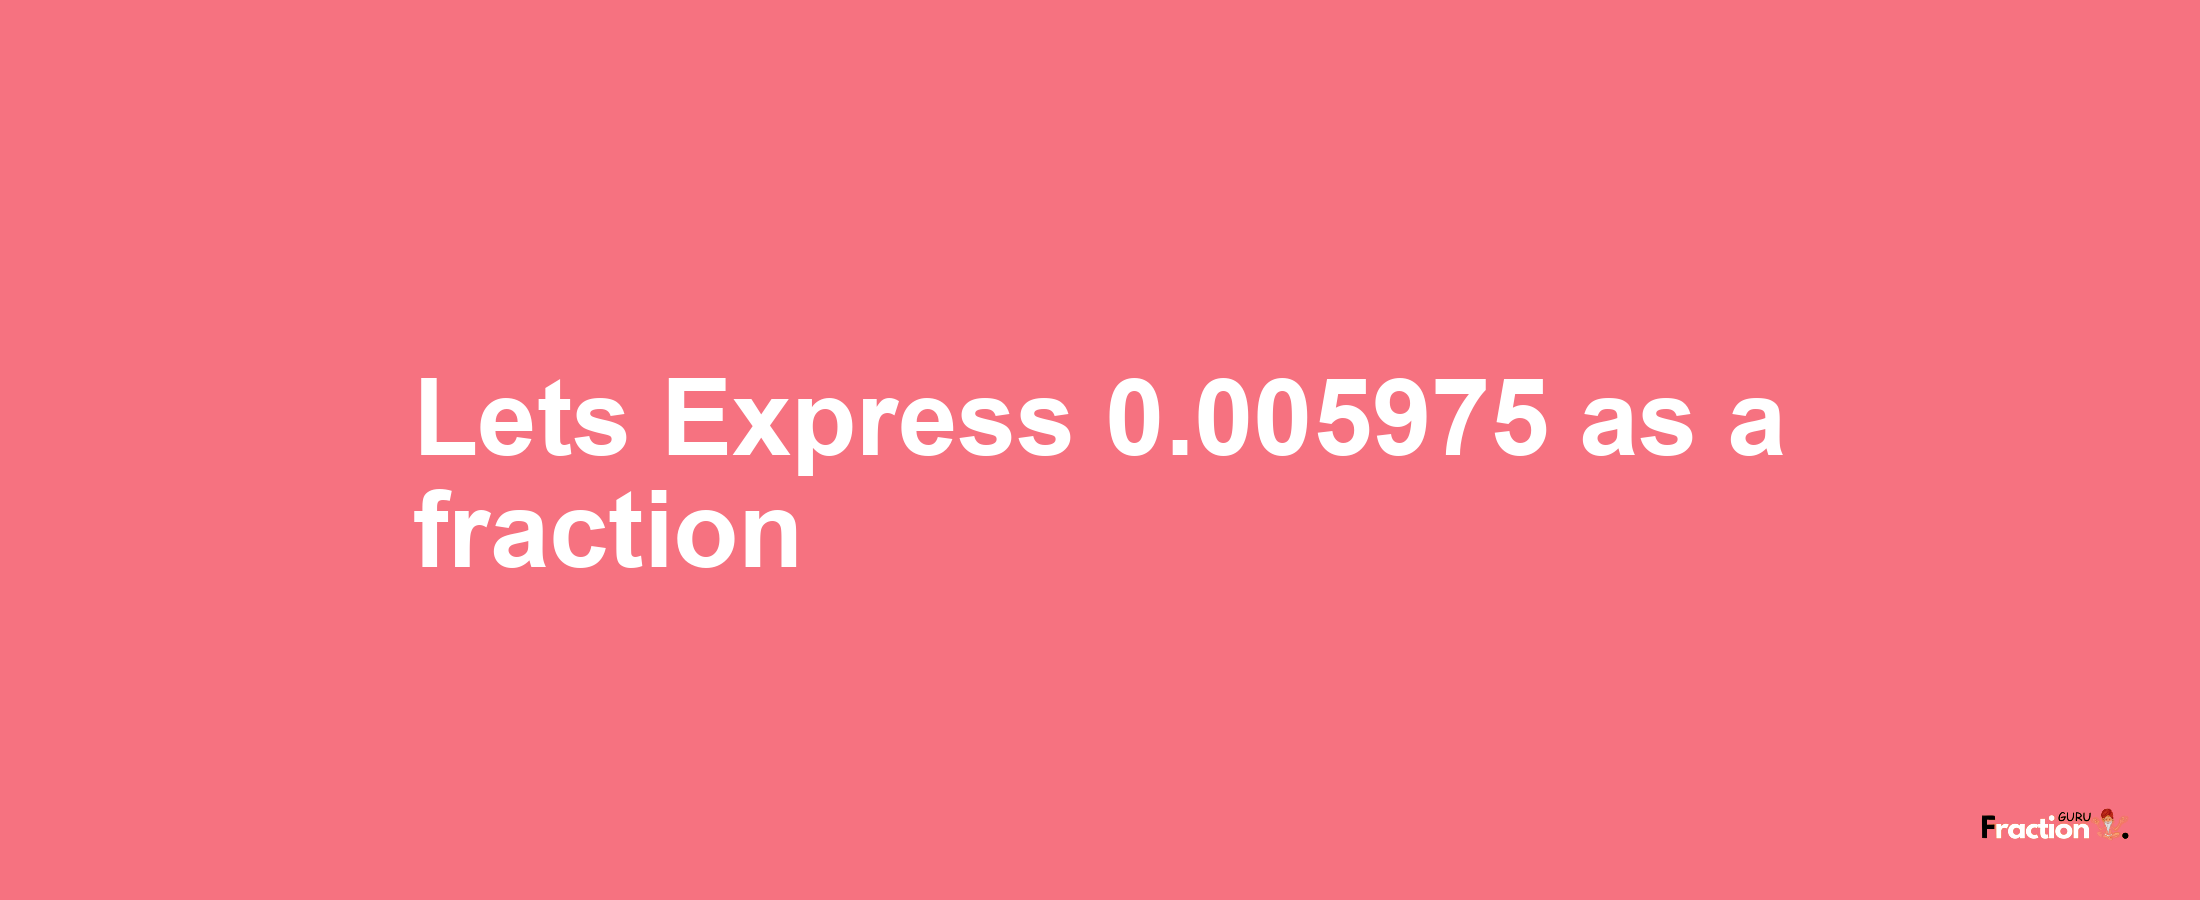 Lets Express 0.005975 as afraction